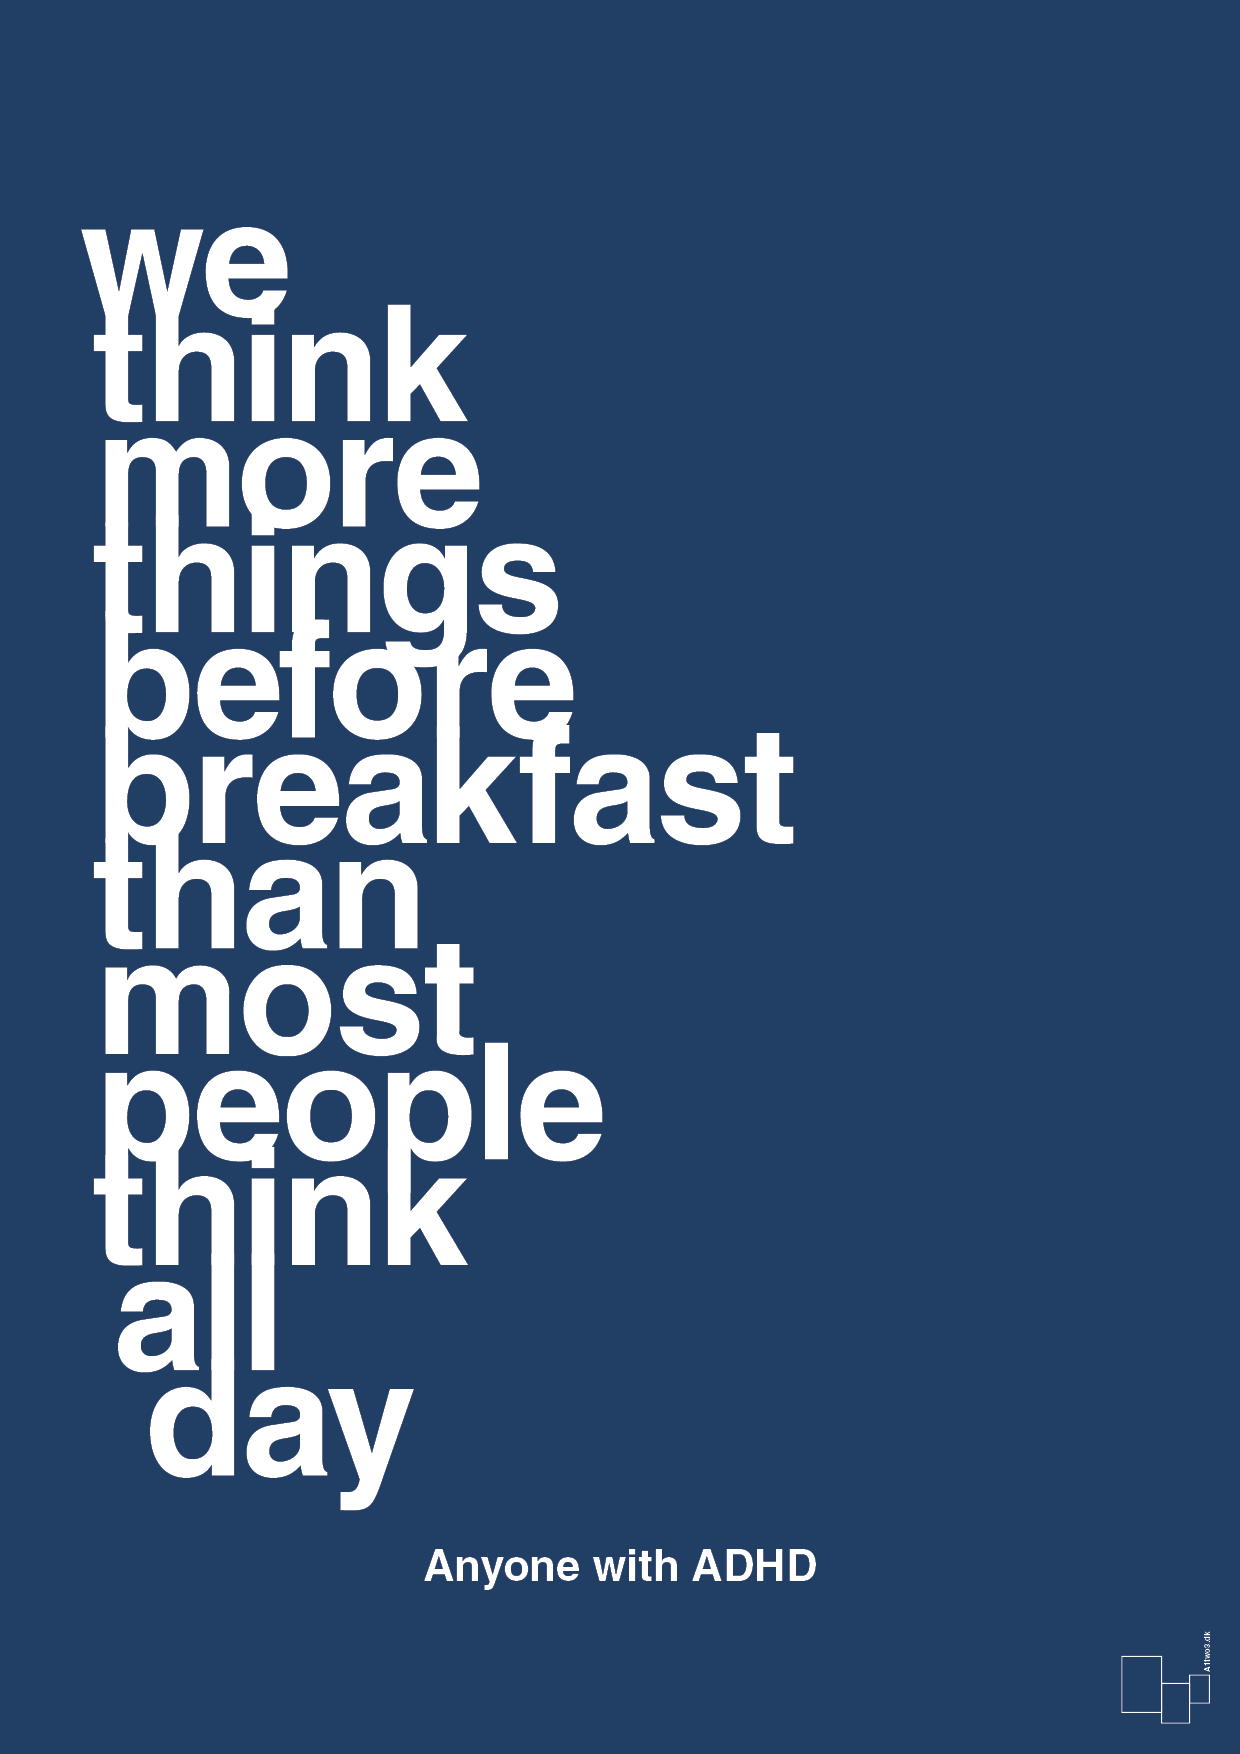 we think more things before breakfast than most people think all day - Plakat med Samfund i Lapis Blue